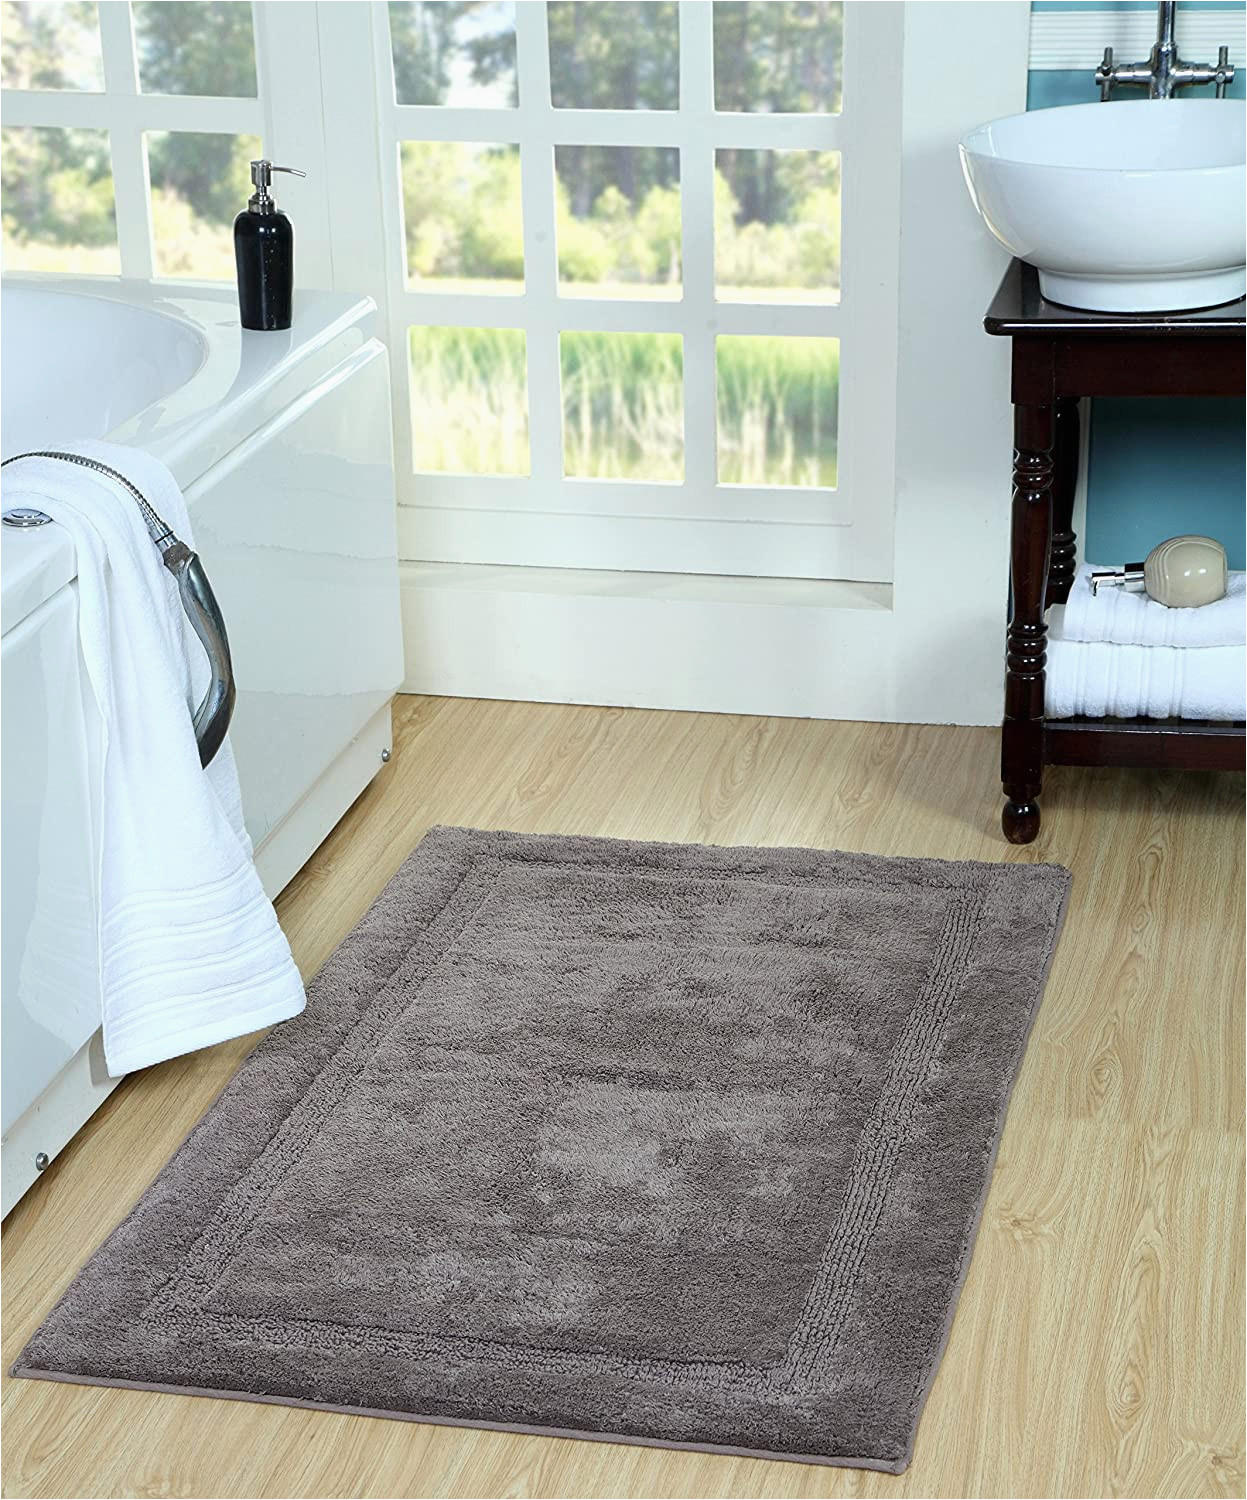 Bath Rug Non Skid Backing Saffron Fabs Bath Rug 100 soft Cotton Size 36×24 Inch Latex Spray Non Skid Backing solid Grey Color Textured Border Hand Tufted Heavy 190 Gsf